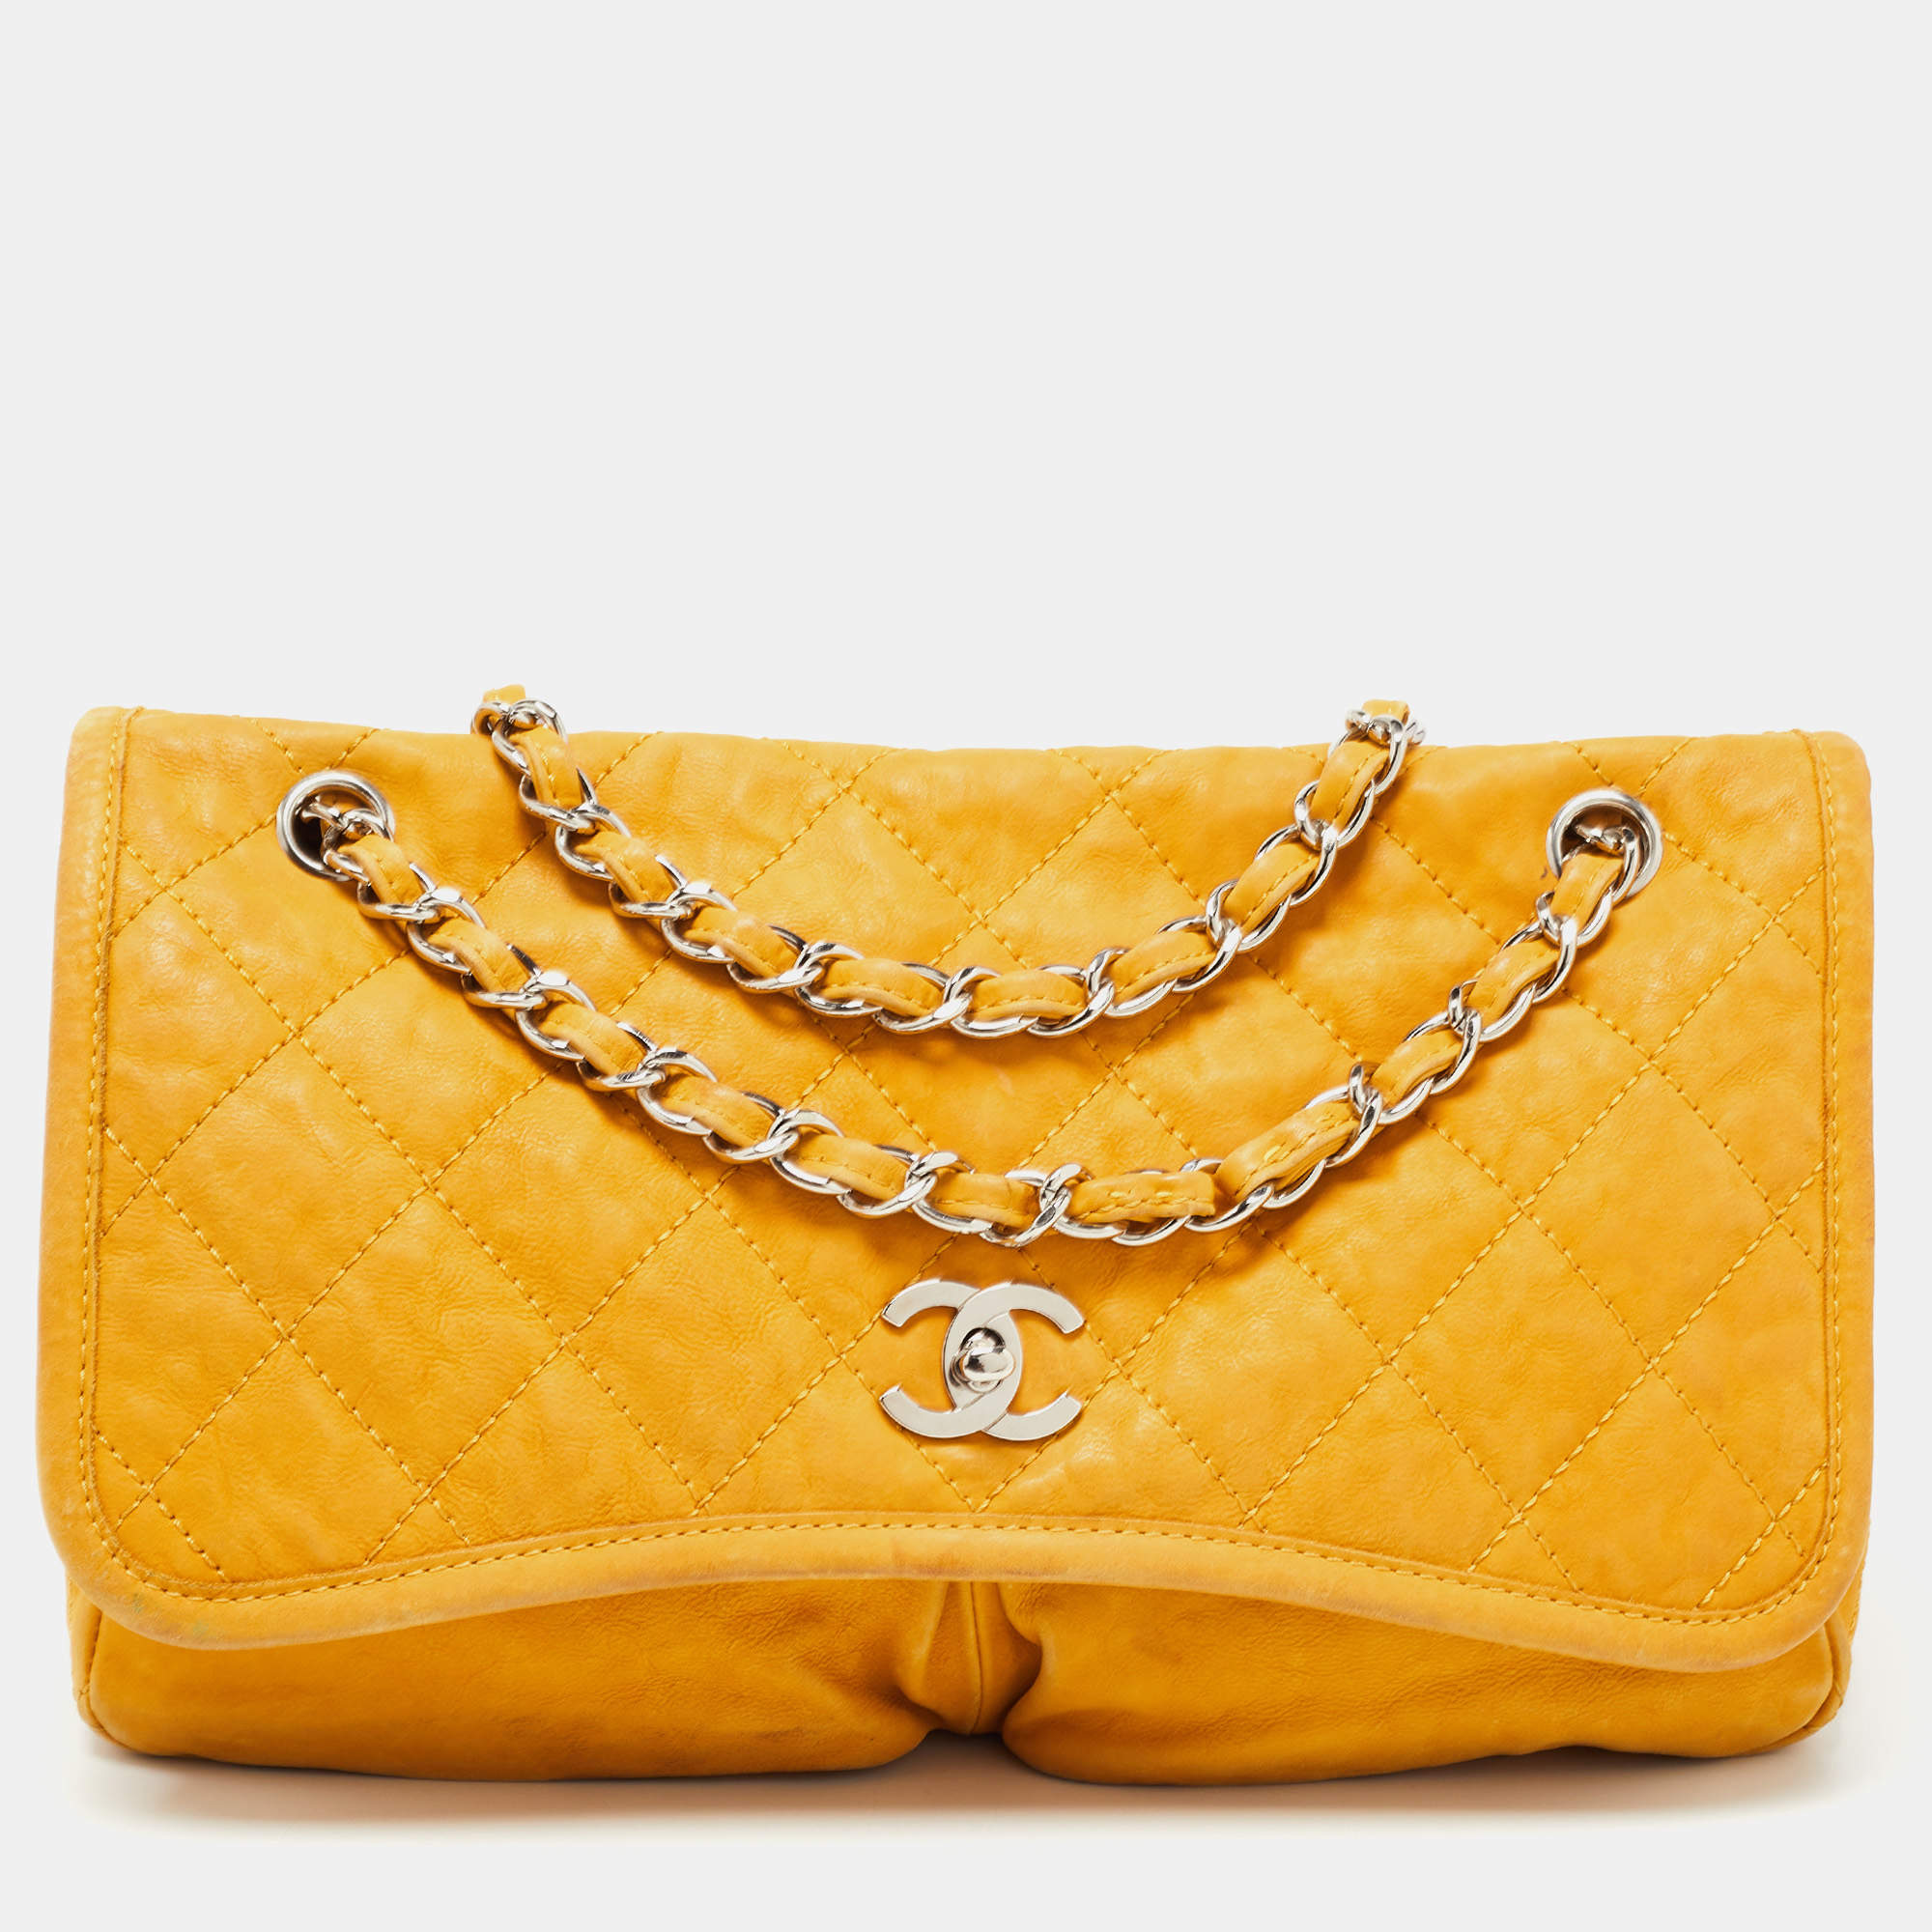 Chanel Mustard Quilted Nubuck Leather Natural Beauty Flap Bag Chanel